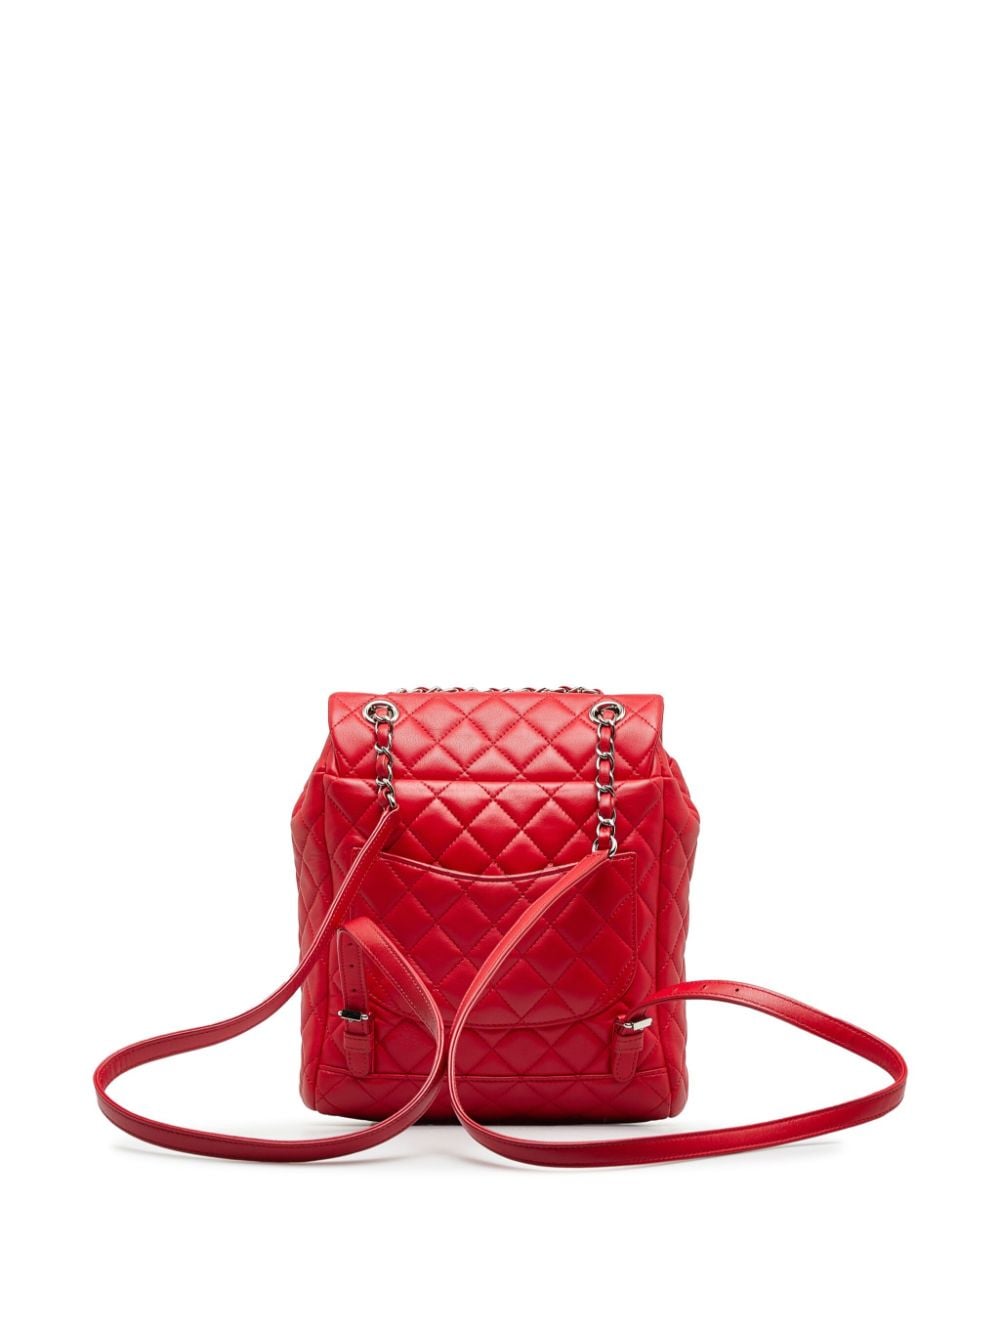 CHANEL Pre-Owned 2016-2017 pre-owned Urban Spirit rugzak - Rood